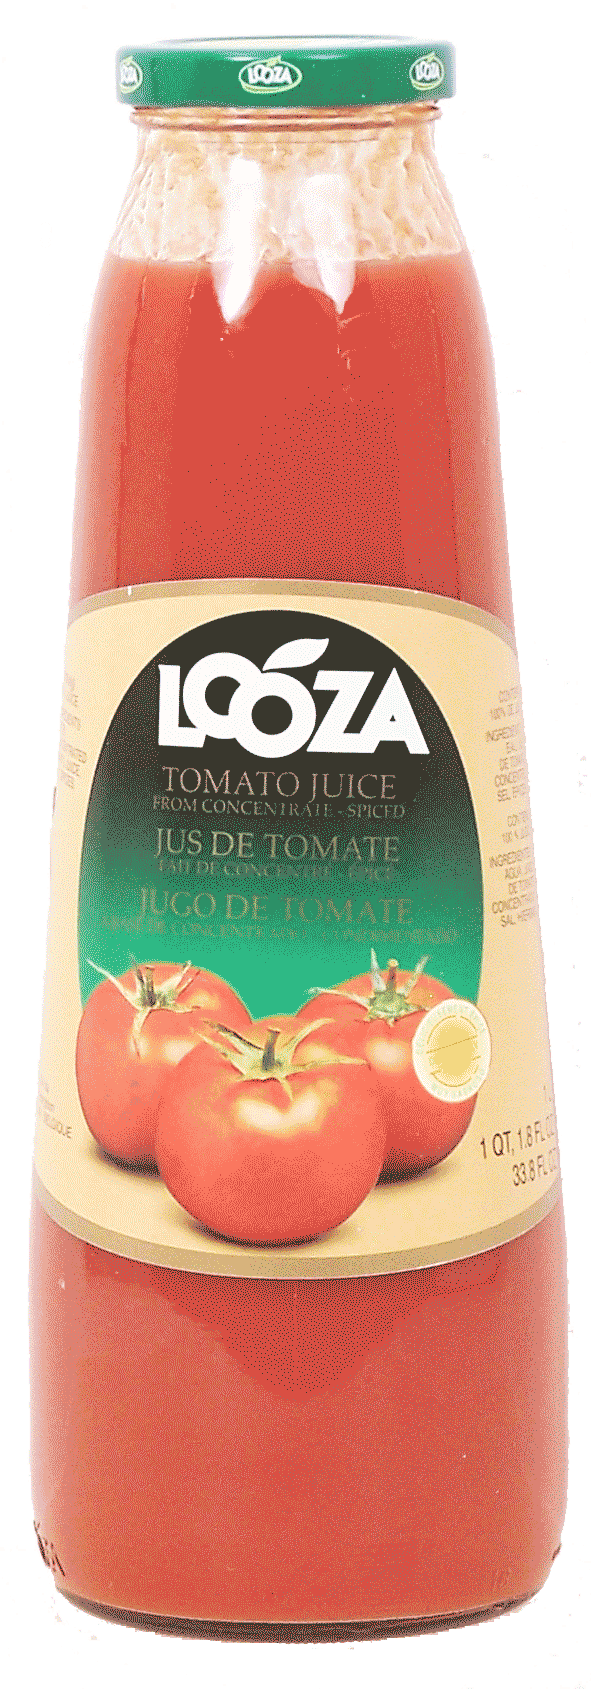 Looza  tomato juice, contains 100% juice Full-Size Picture